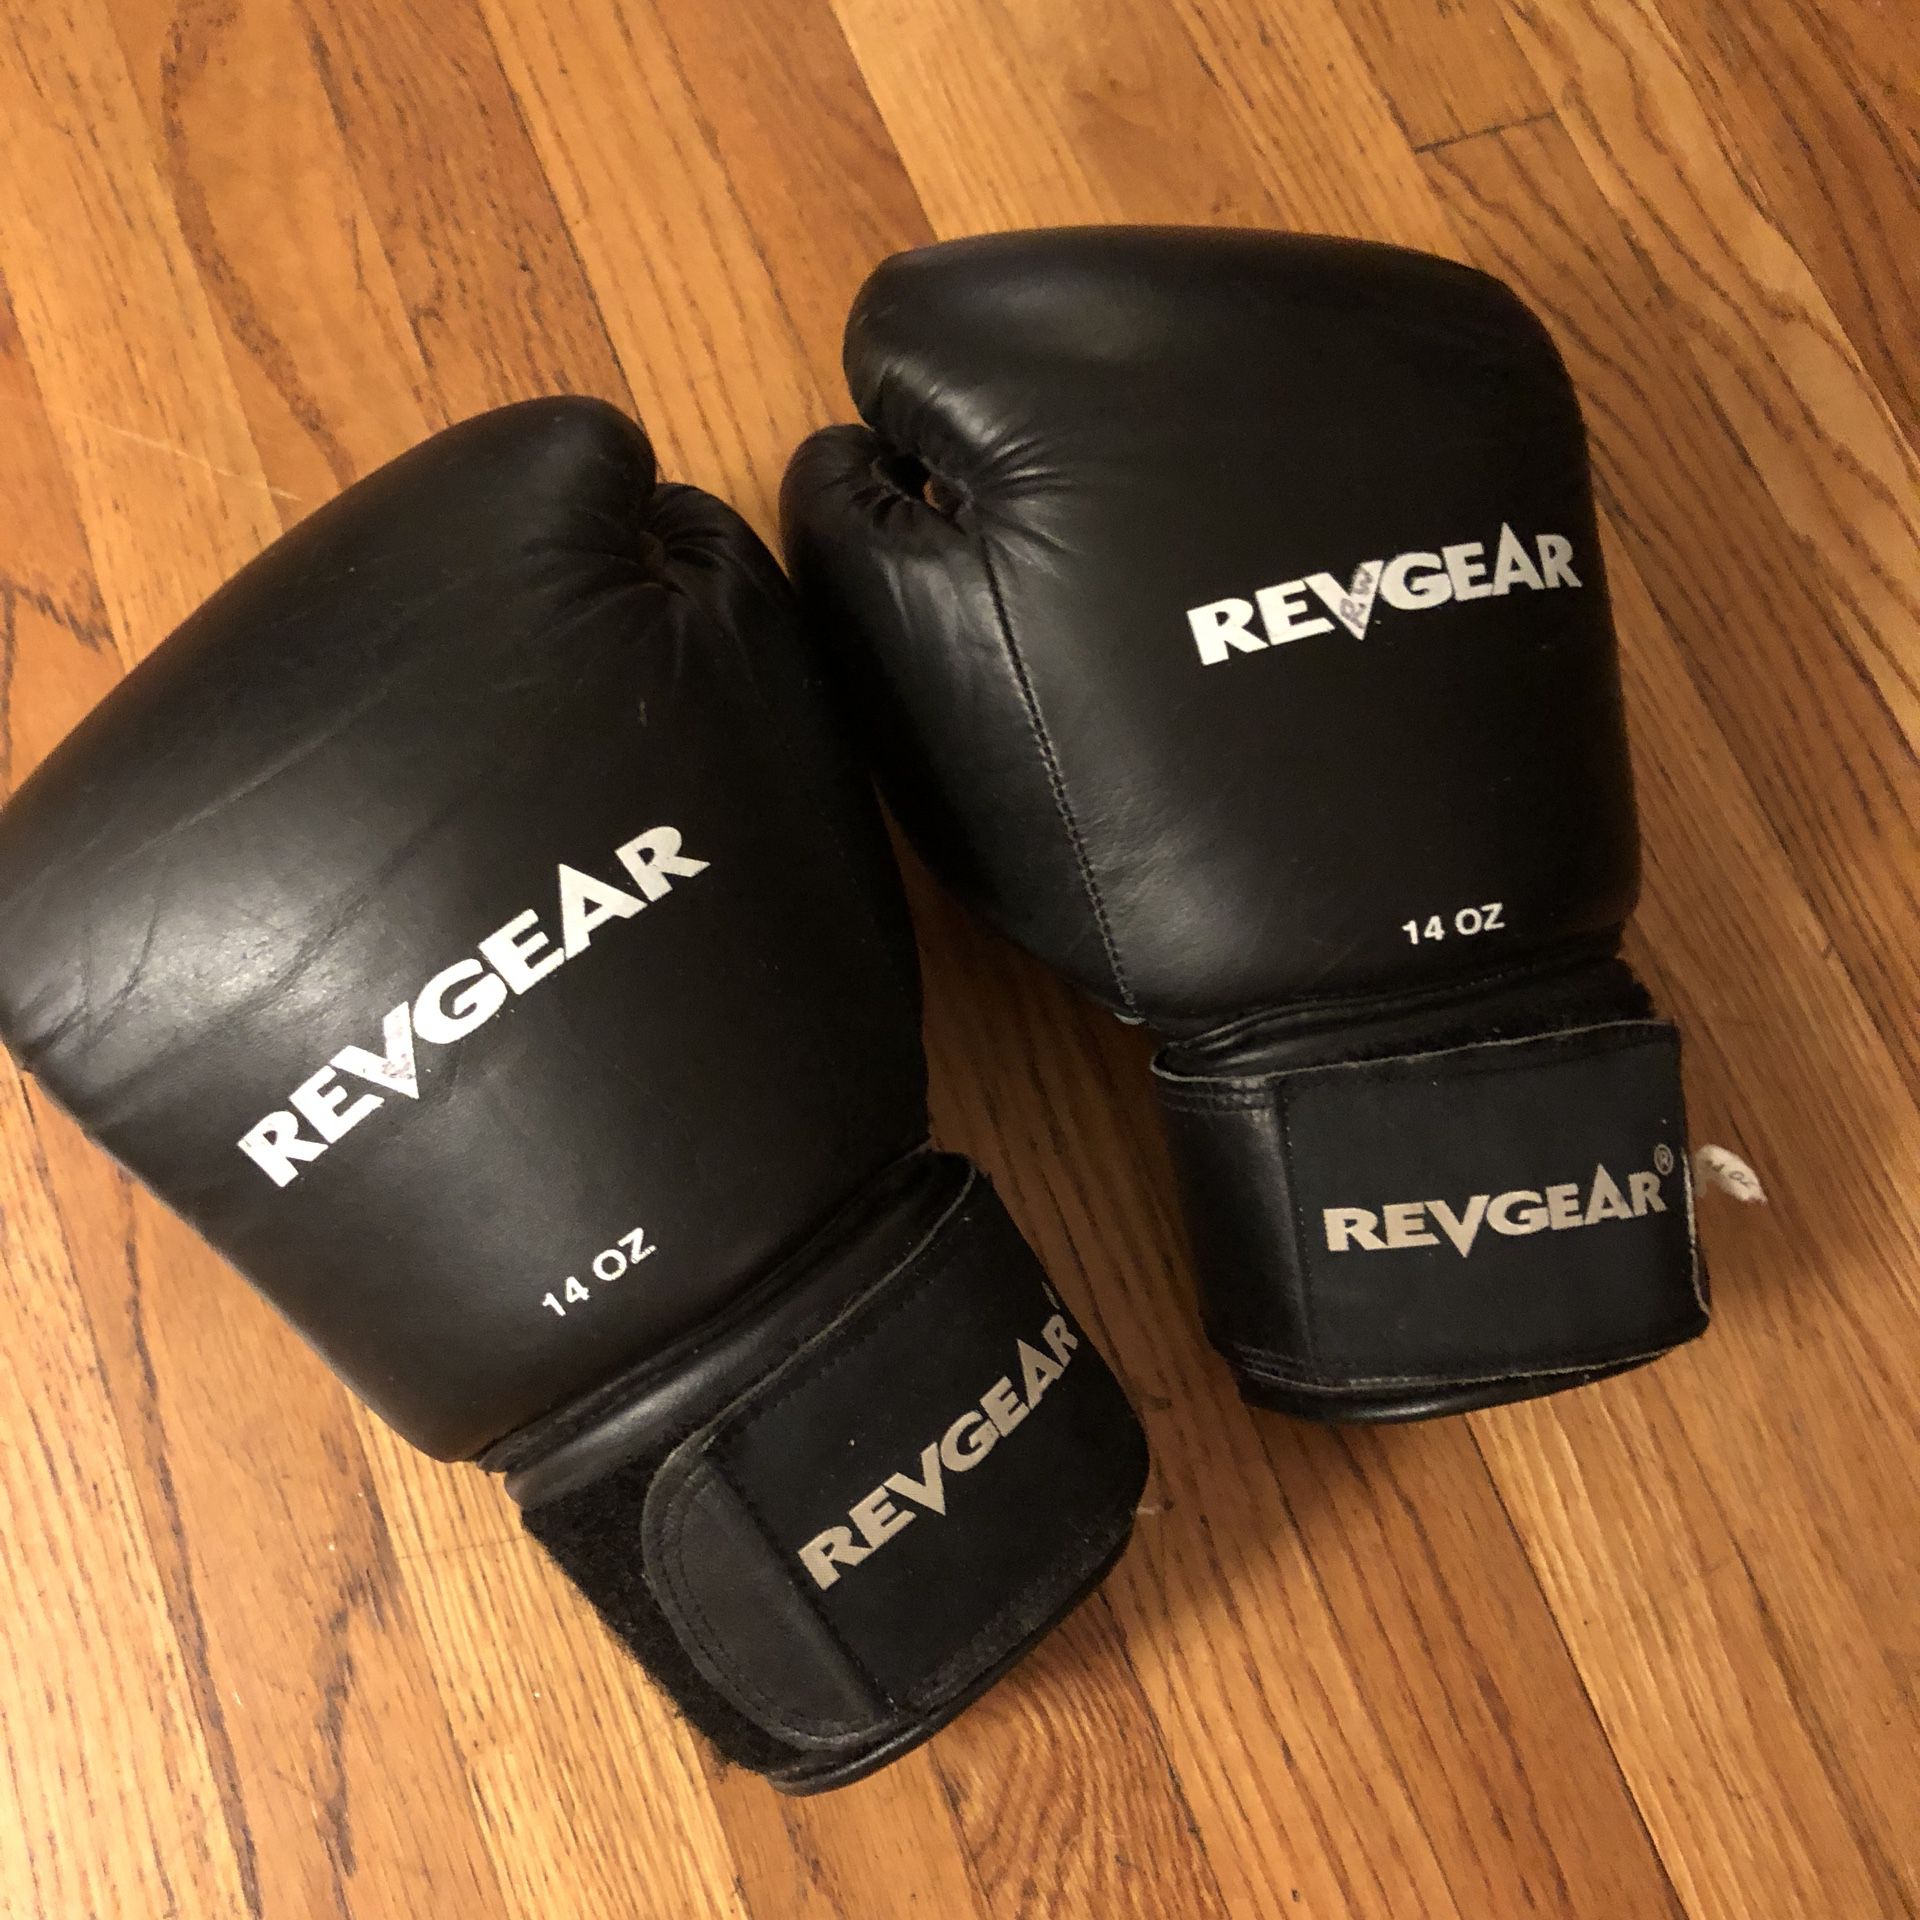 RevGear 14oz Leather Boxing Gloves - Excellent Condition